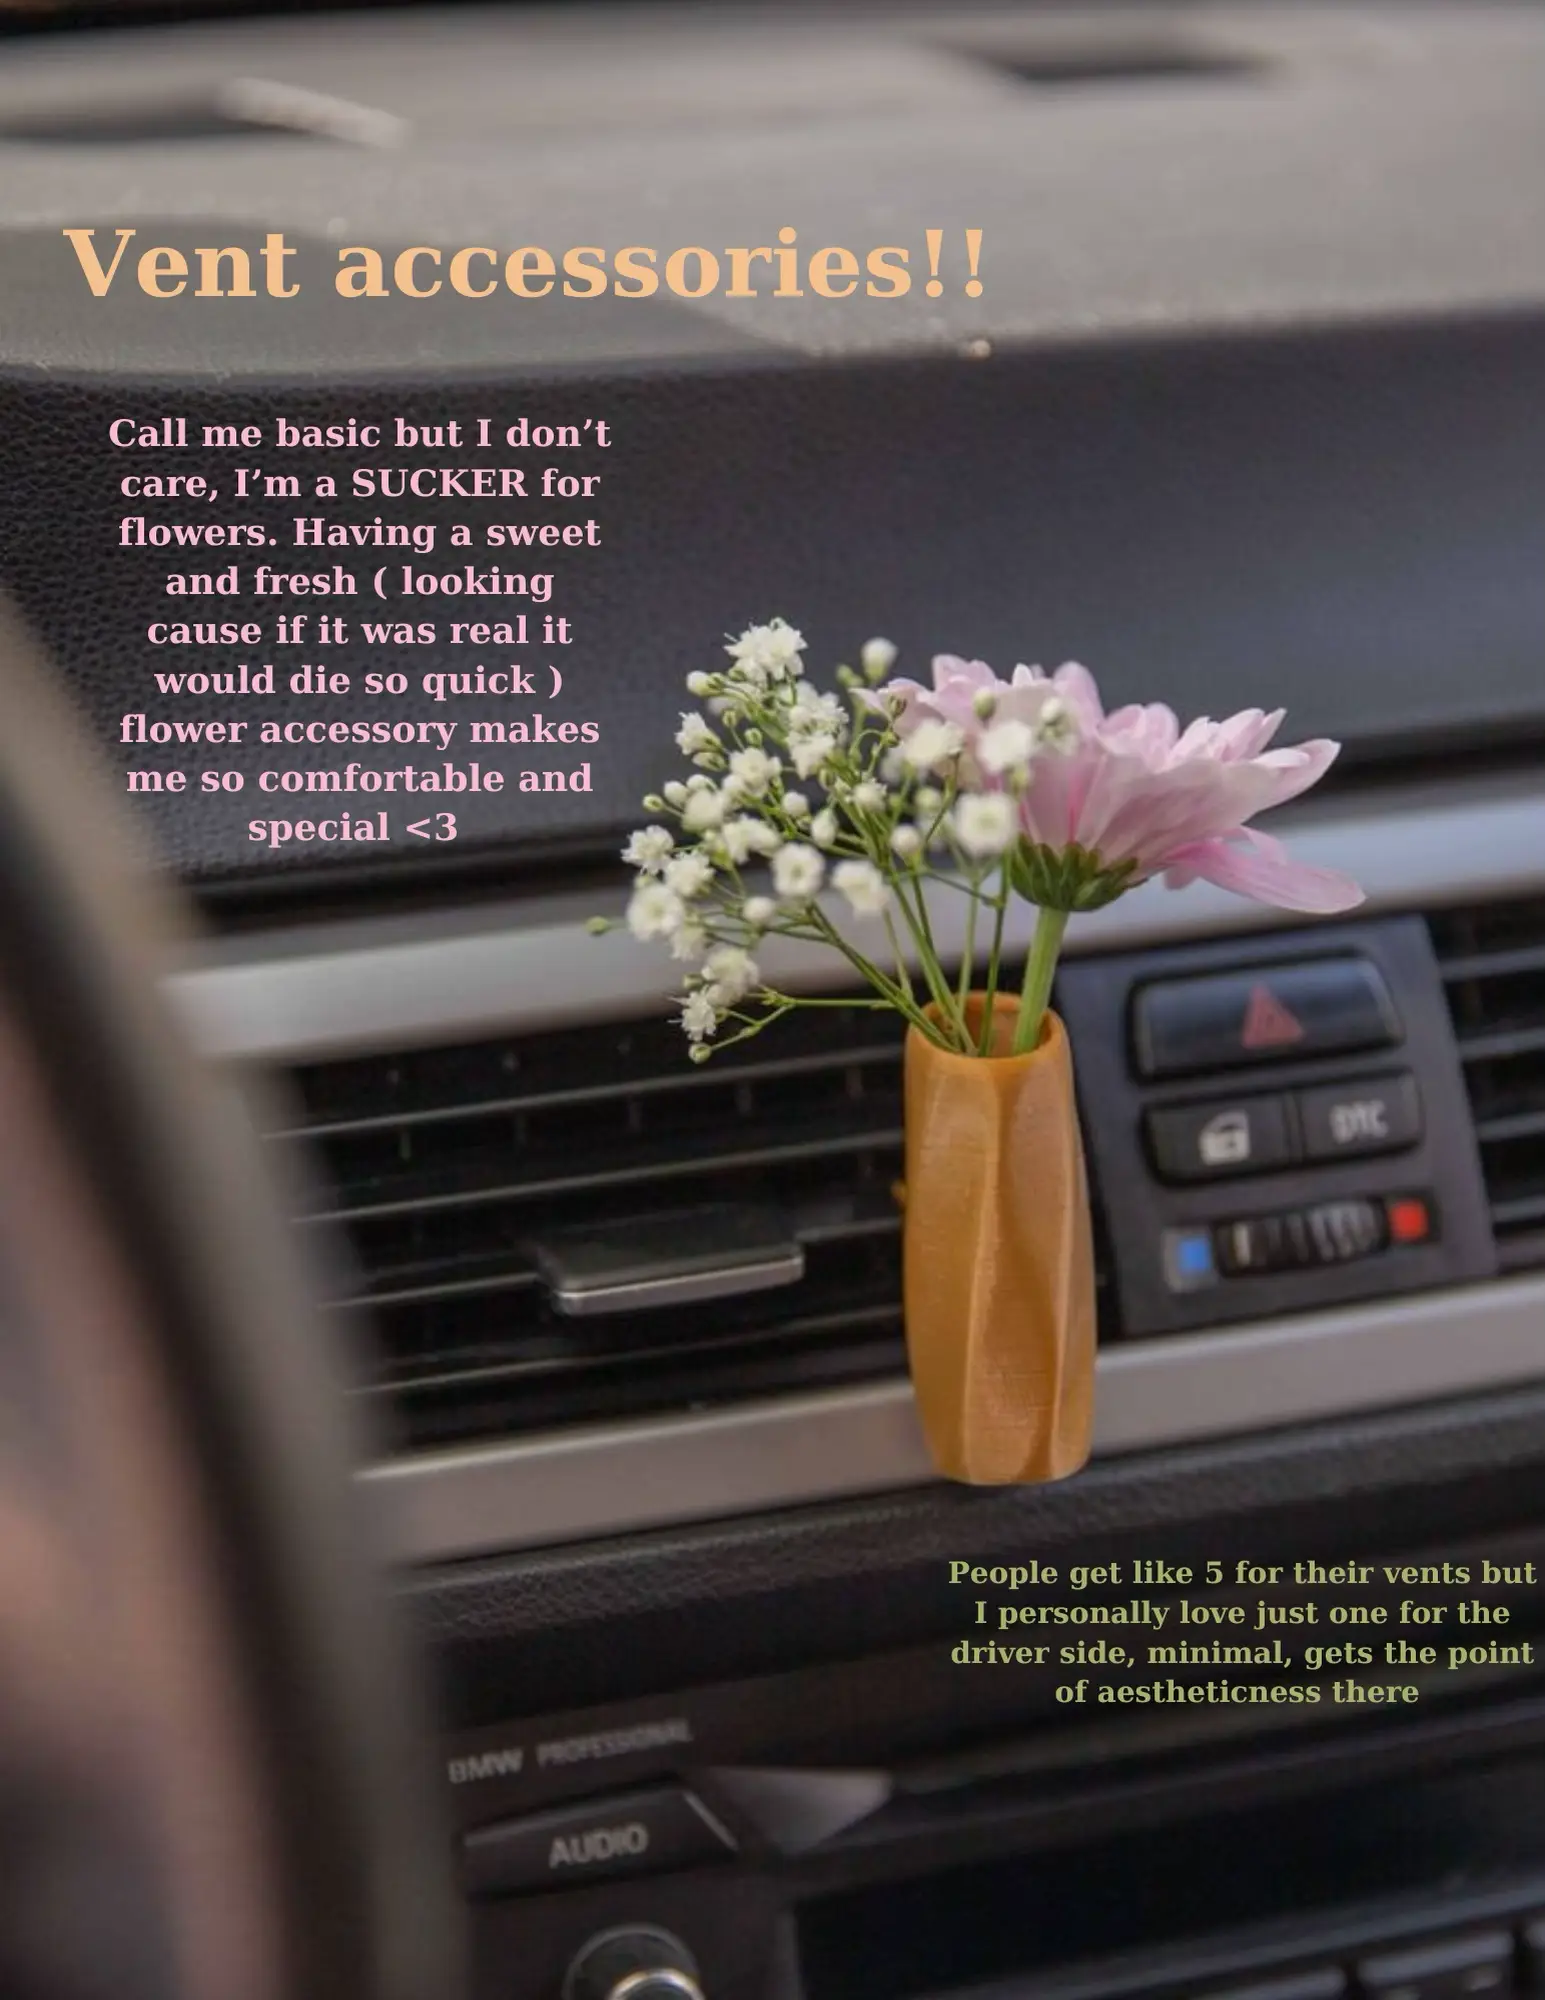 Cute Gifts Pink Car Decor Accessories for Women Teens, 6pcs Car Scent Air  Fresheners Vent Clips, Girly Daisy Flower Decorations Interior Aesthetic  Things, Car Perfume Stuff for Her Mom Girls 